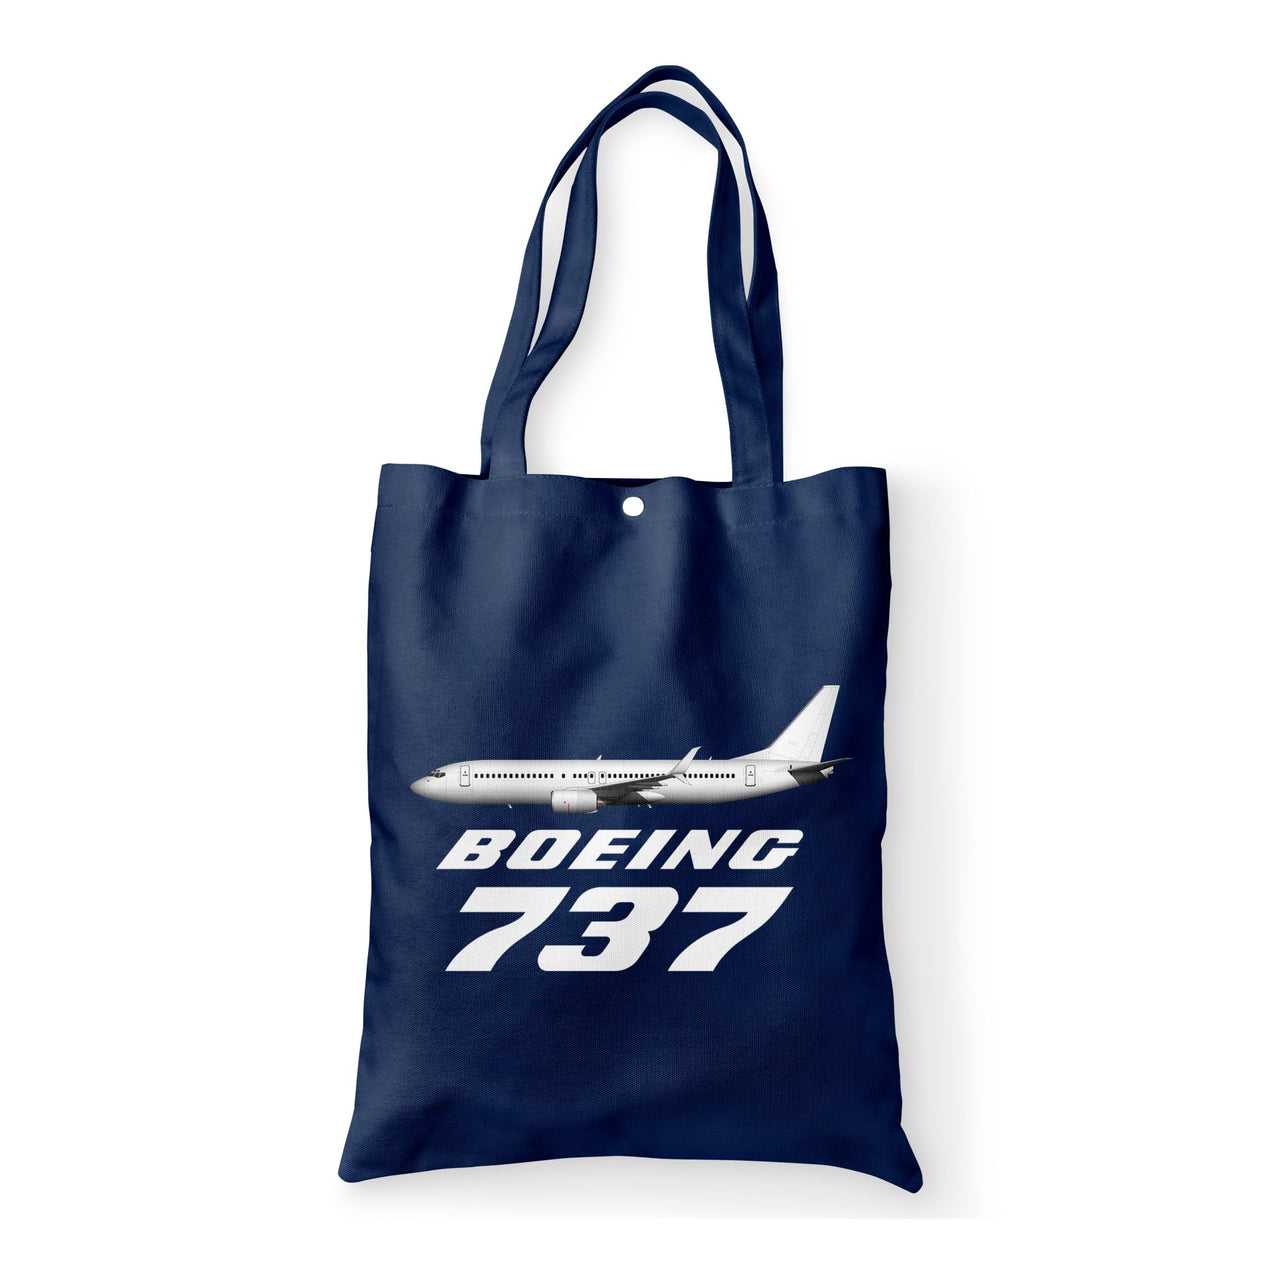 The Boeing 737 Designed Tote Bags